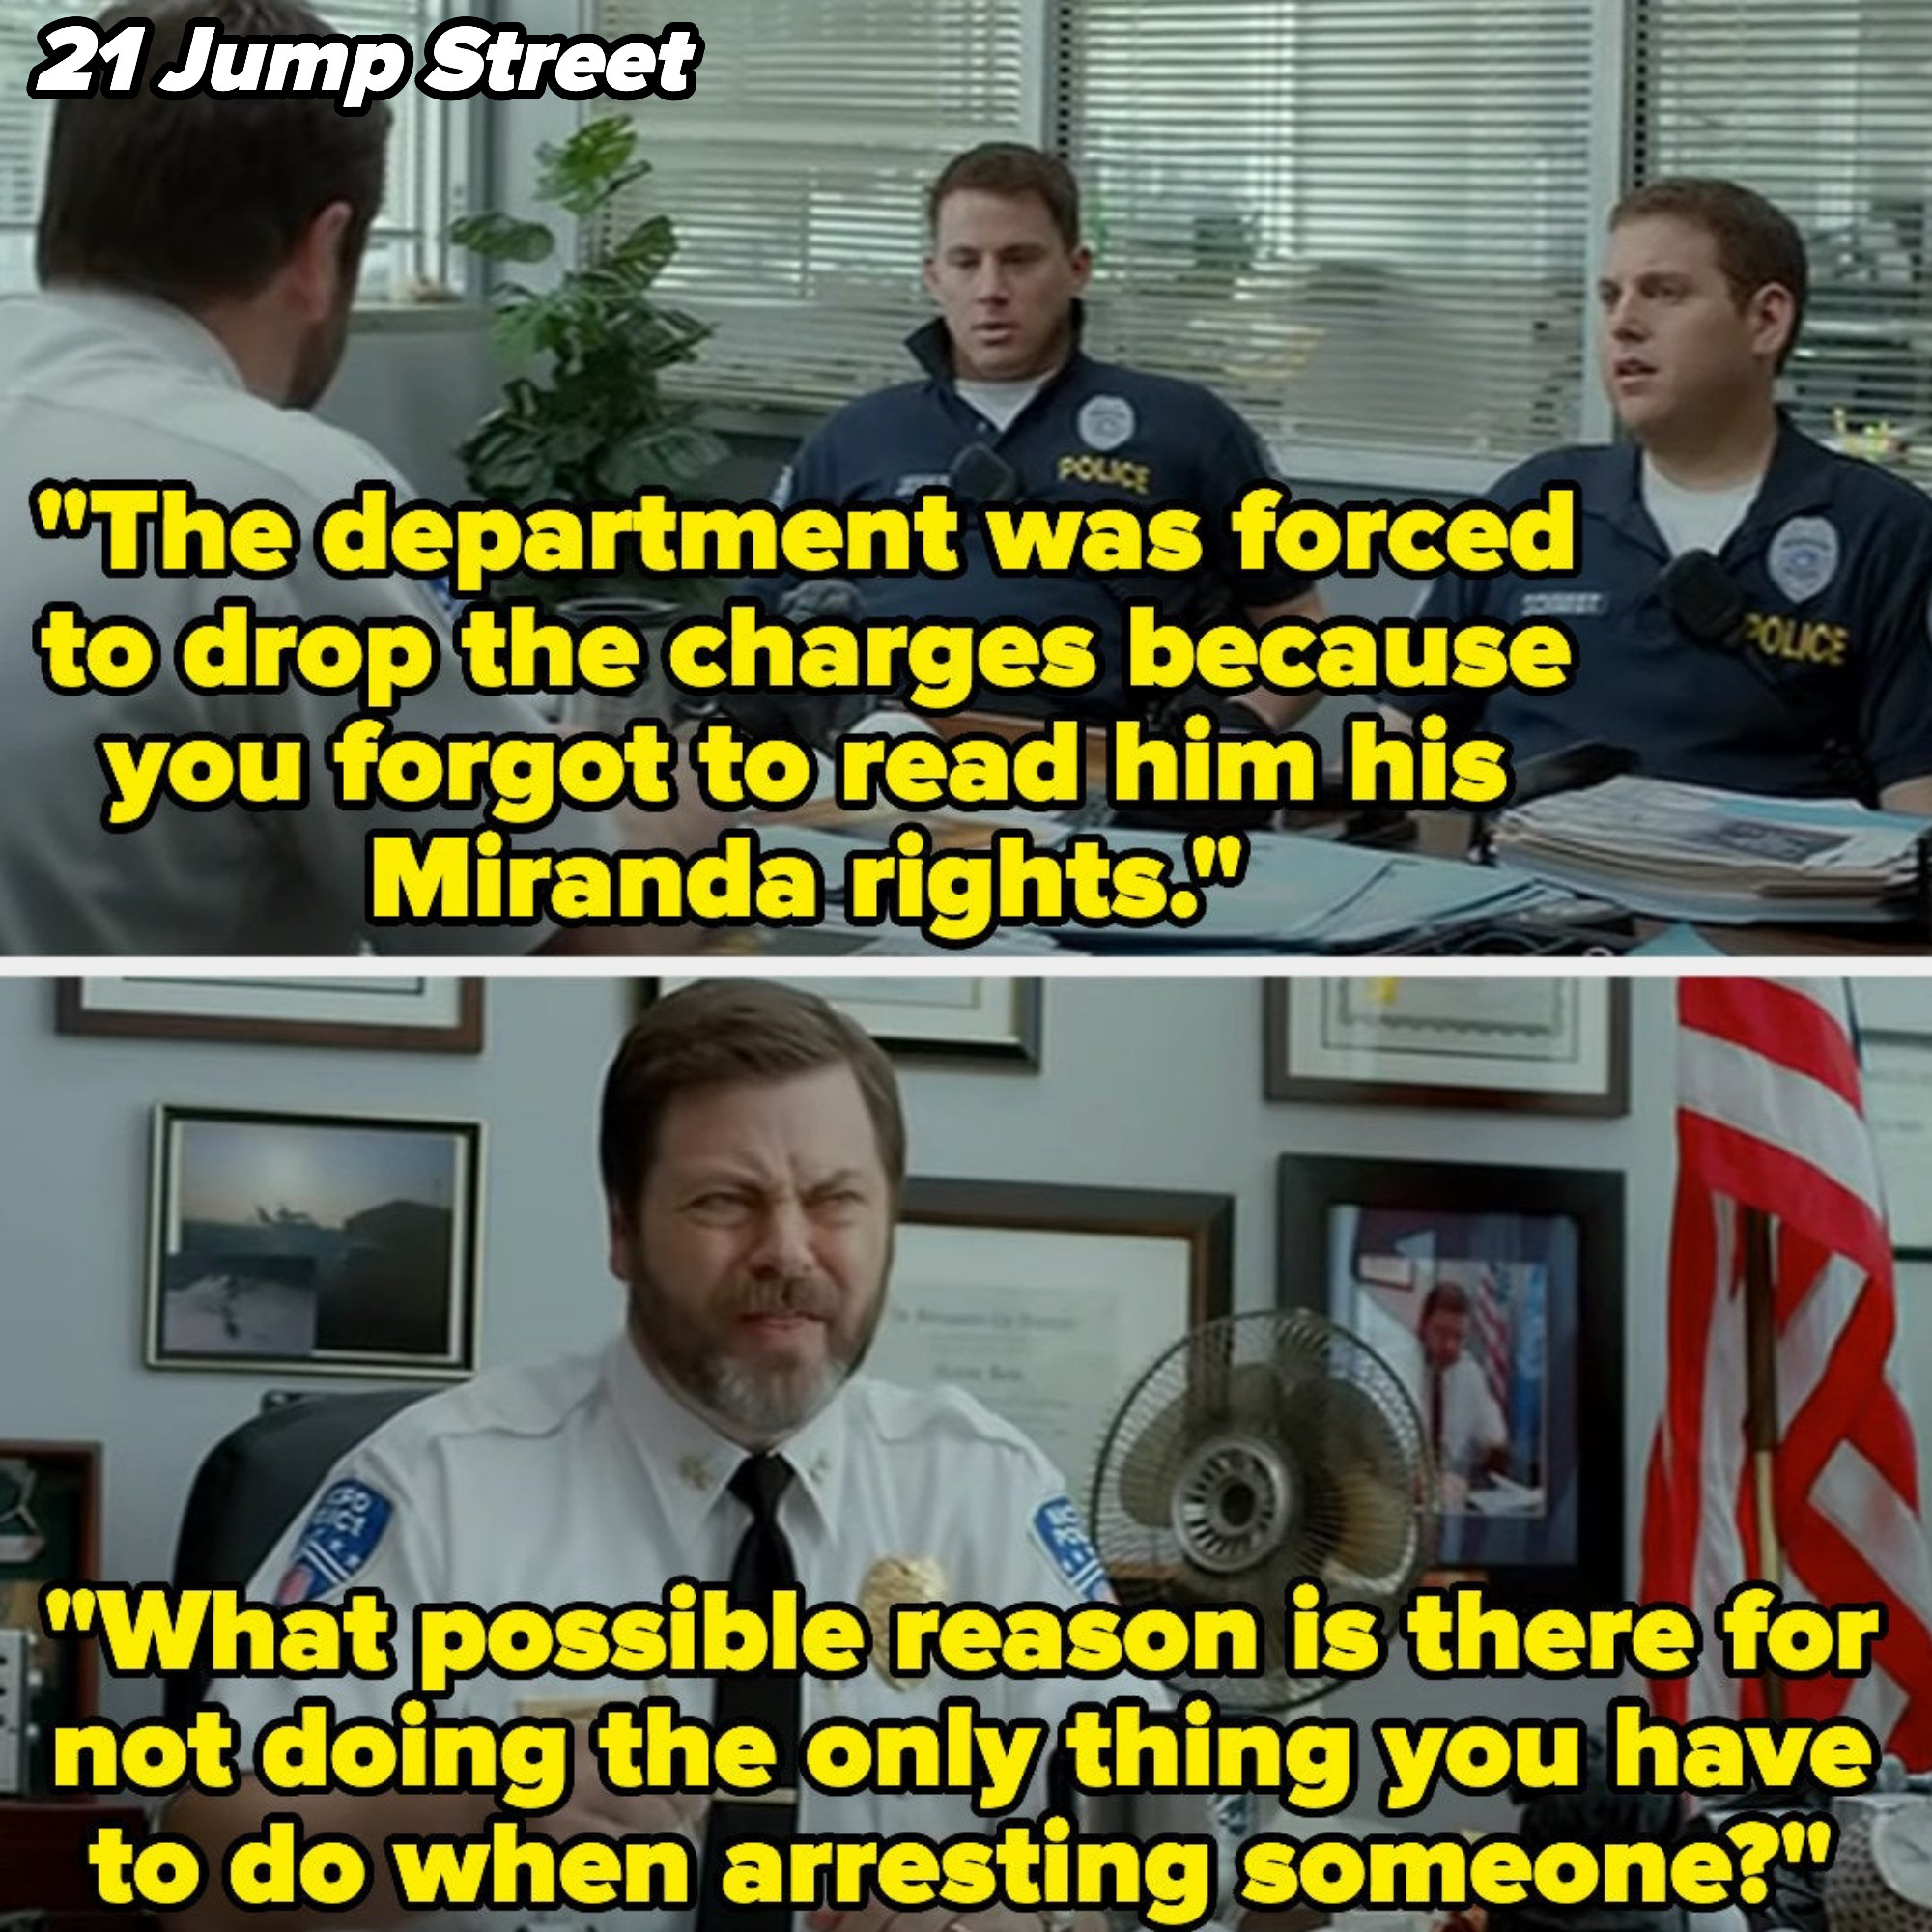 &quot;What possible reason is there for not doing the only thing you have to do when arresting someone?&quot;